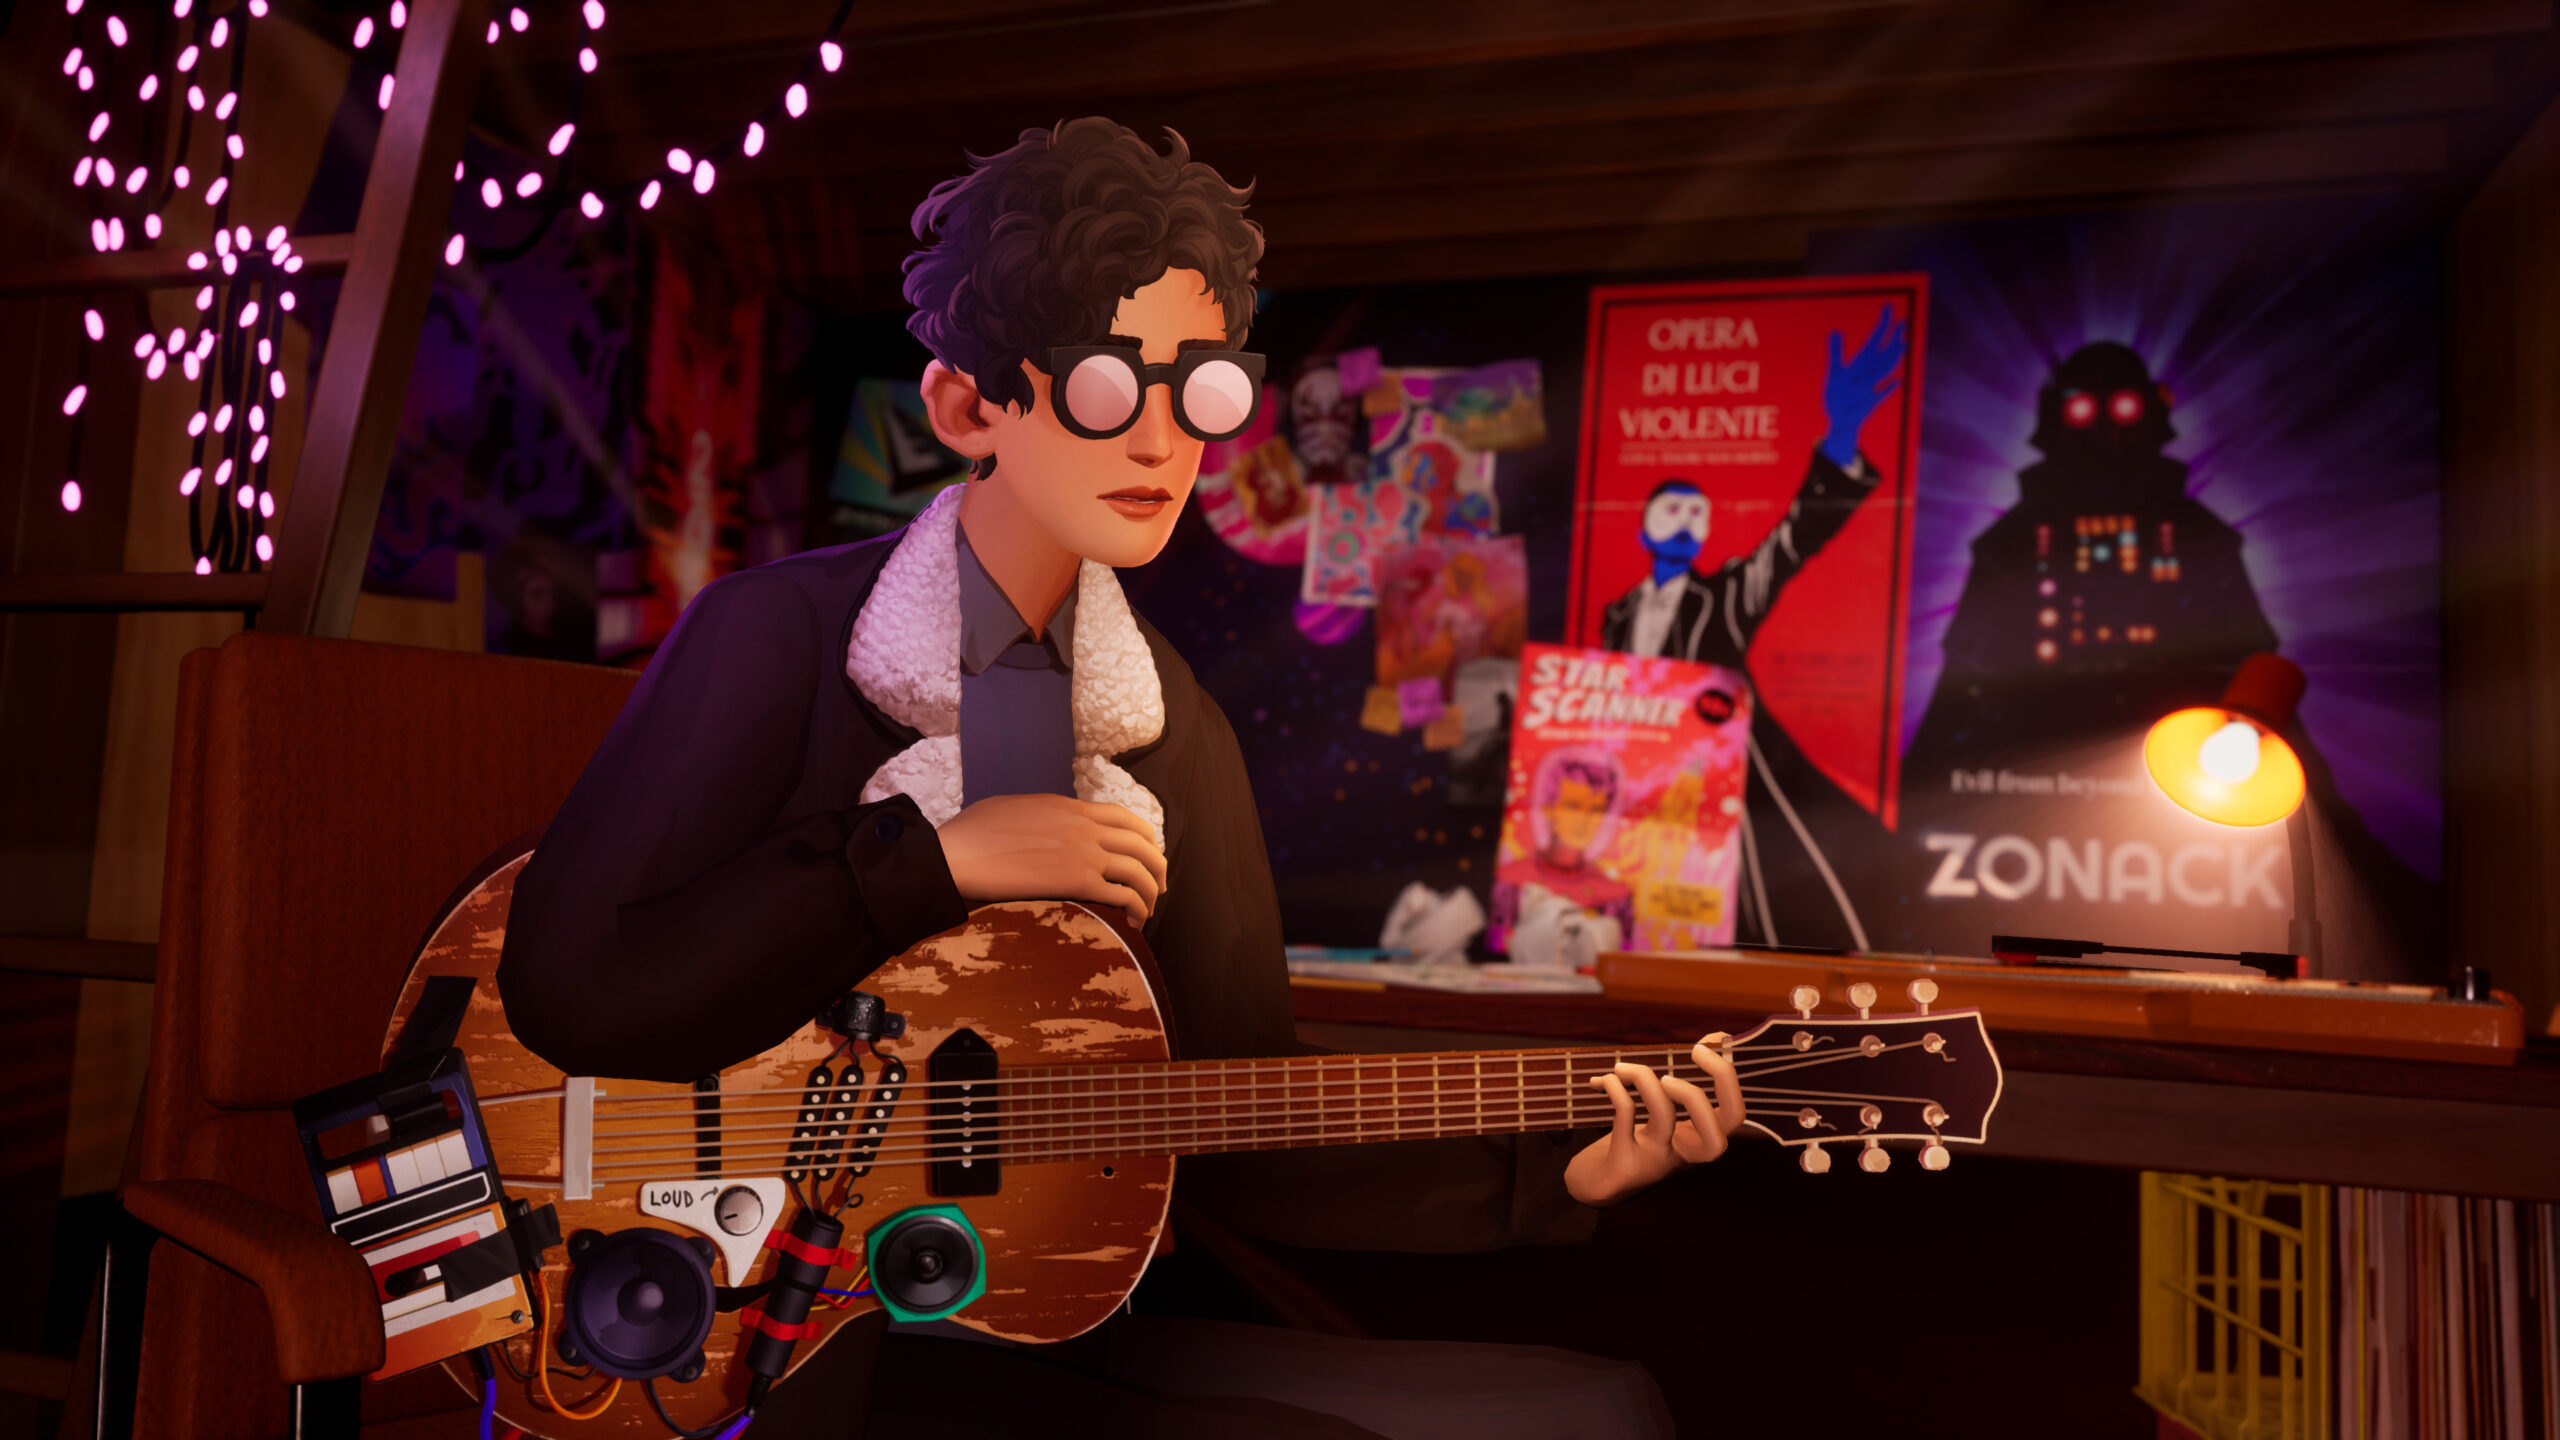 Screenshot from the Artful Escape. Depicting Francis Vendetti holding a guitar.